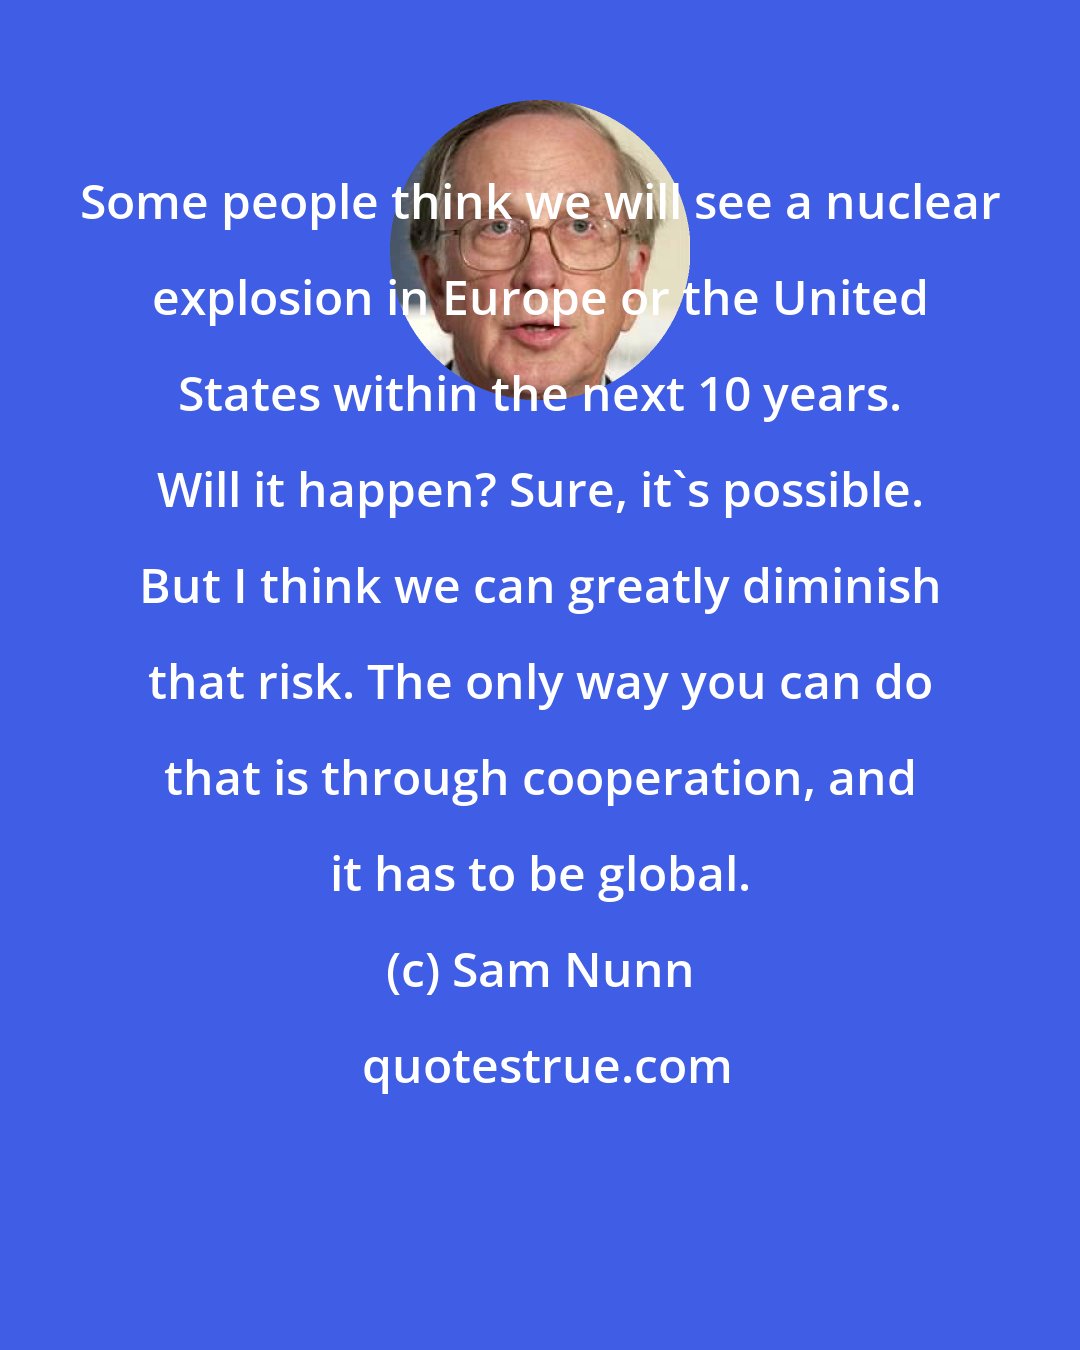 Sam Nunn: Some people think we will see a nuclear explosion in Europe or the United States within the next 10 years. Will it happen? Sure, it's possible. But I think we can greatly diminish that risk. The only way you can do that is through cooperation, and it has to be global.